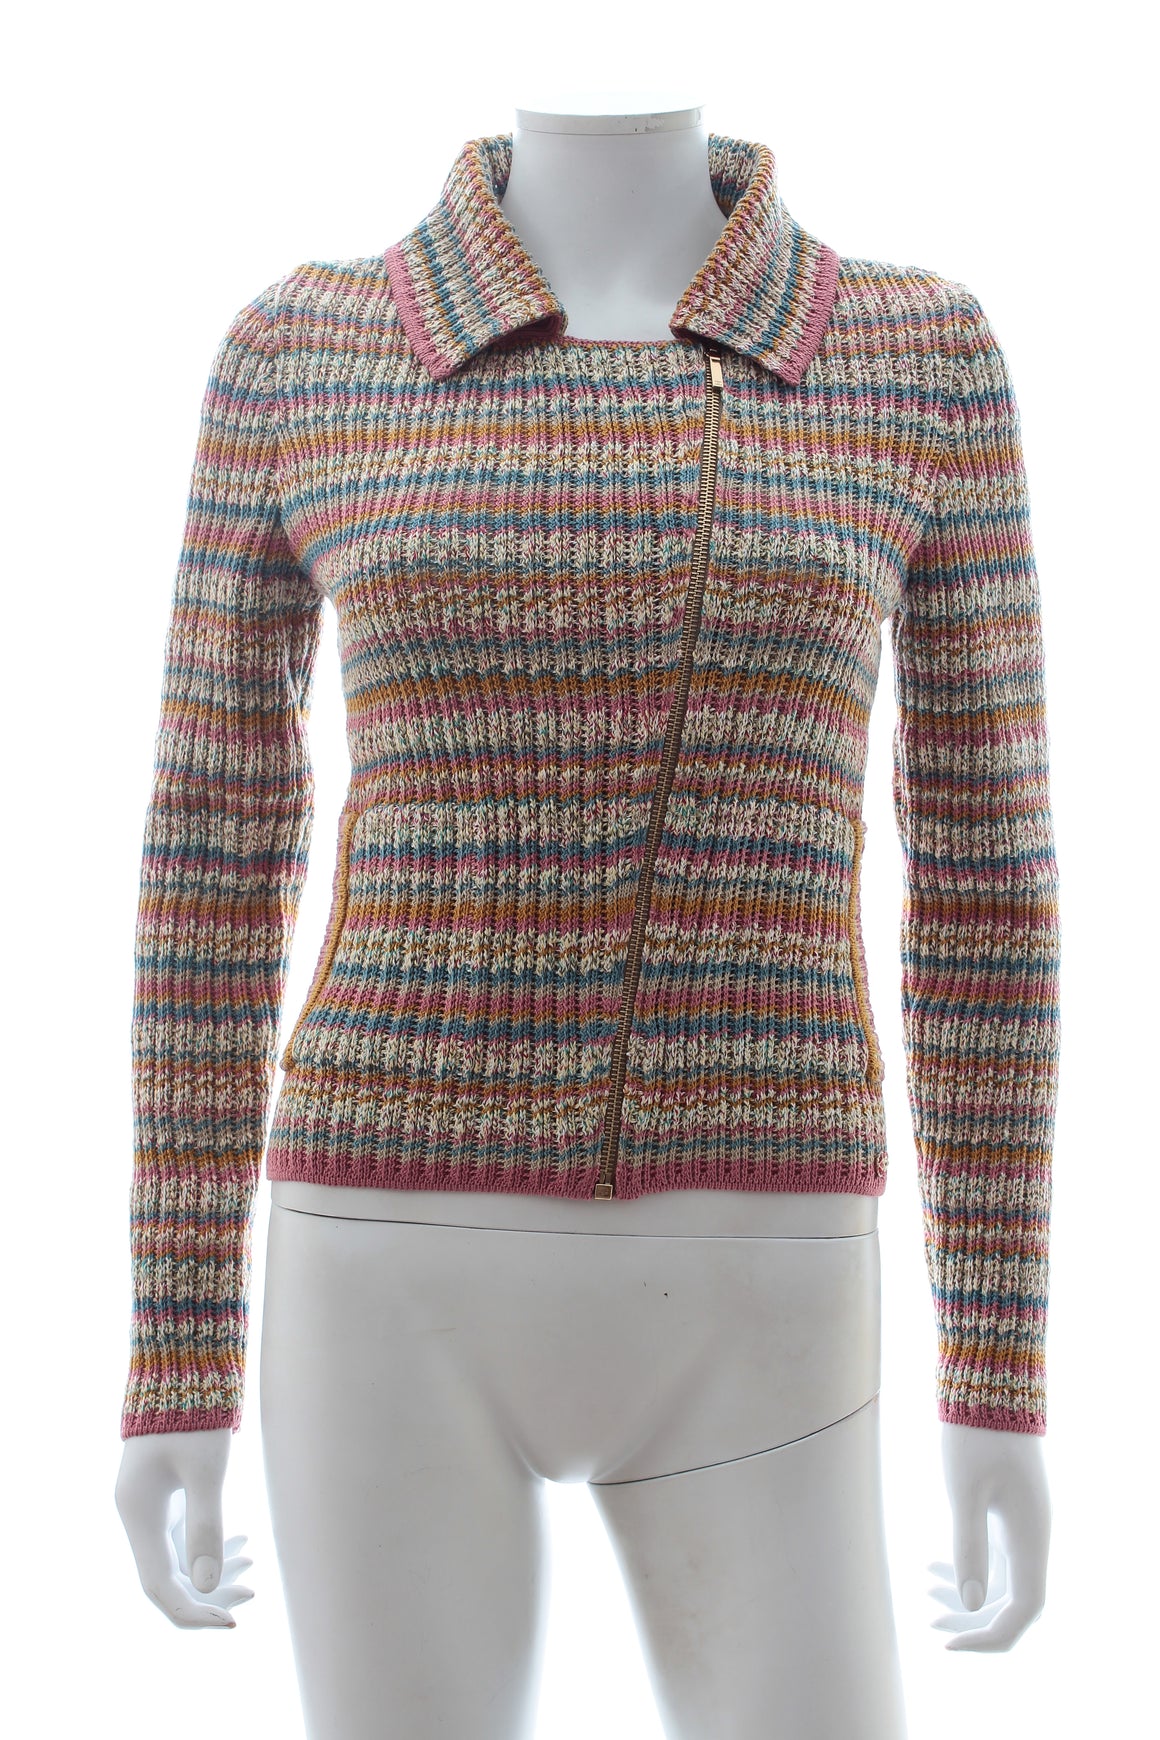 Chanel Multicoloured Knitted Cotton Jacket - Chanel 2017 Coco Cuba Cruise Collection